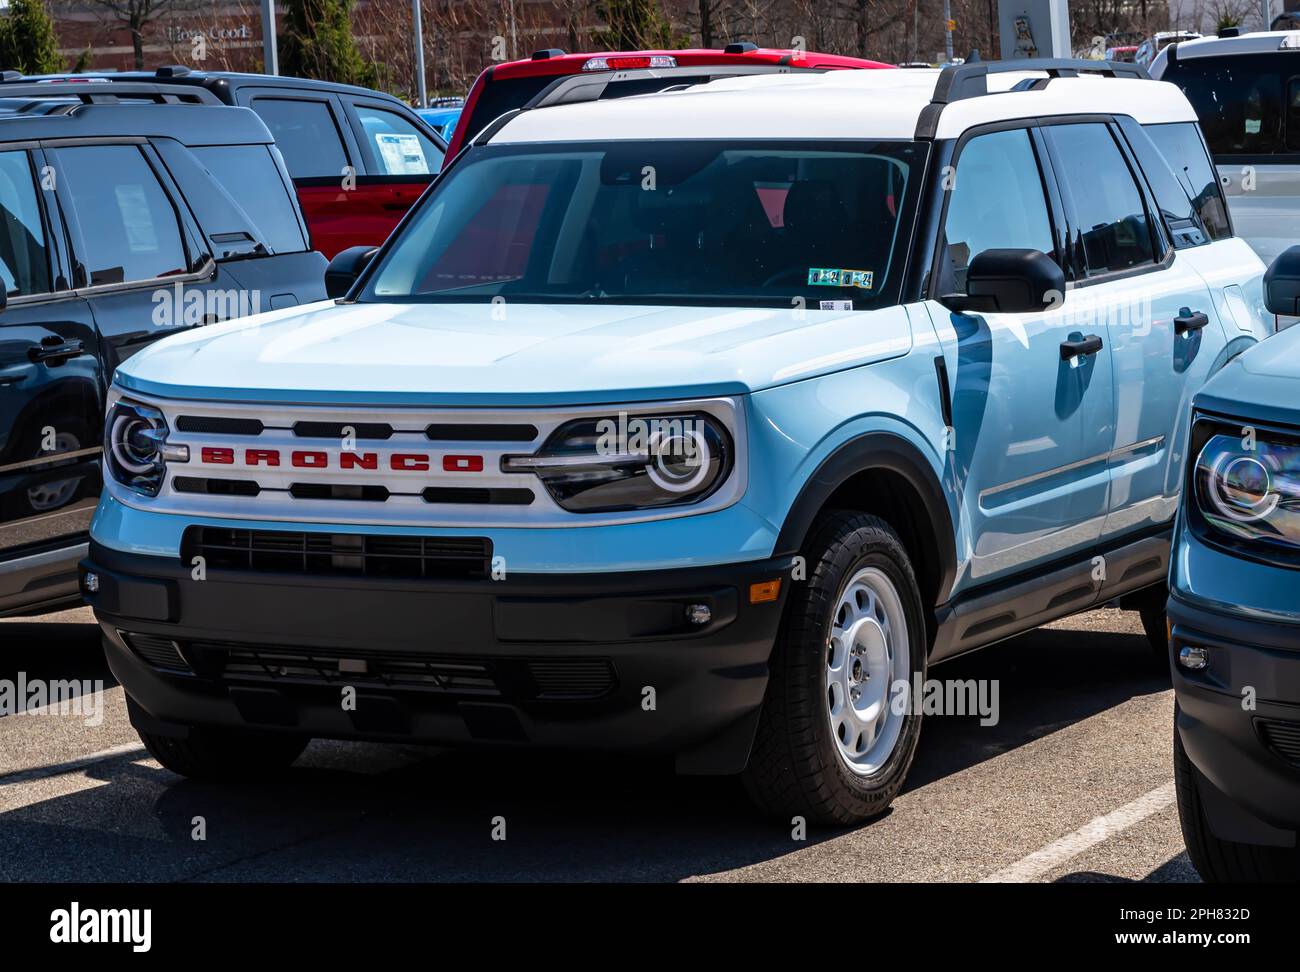 A two toned white and light blue Ford Bronco SUV for sale at a dealership in Monroeville, Pennsylvania, USA Stock Photo